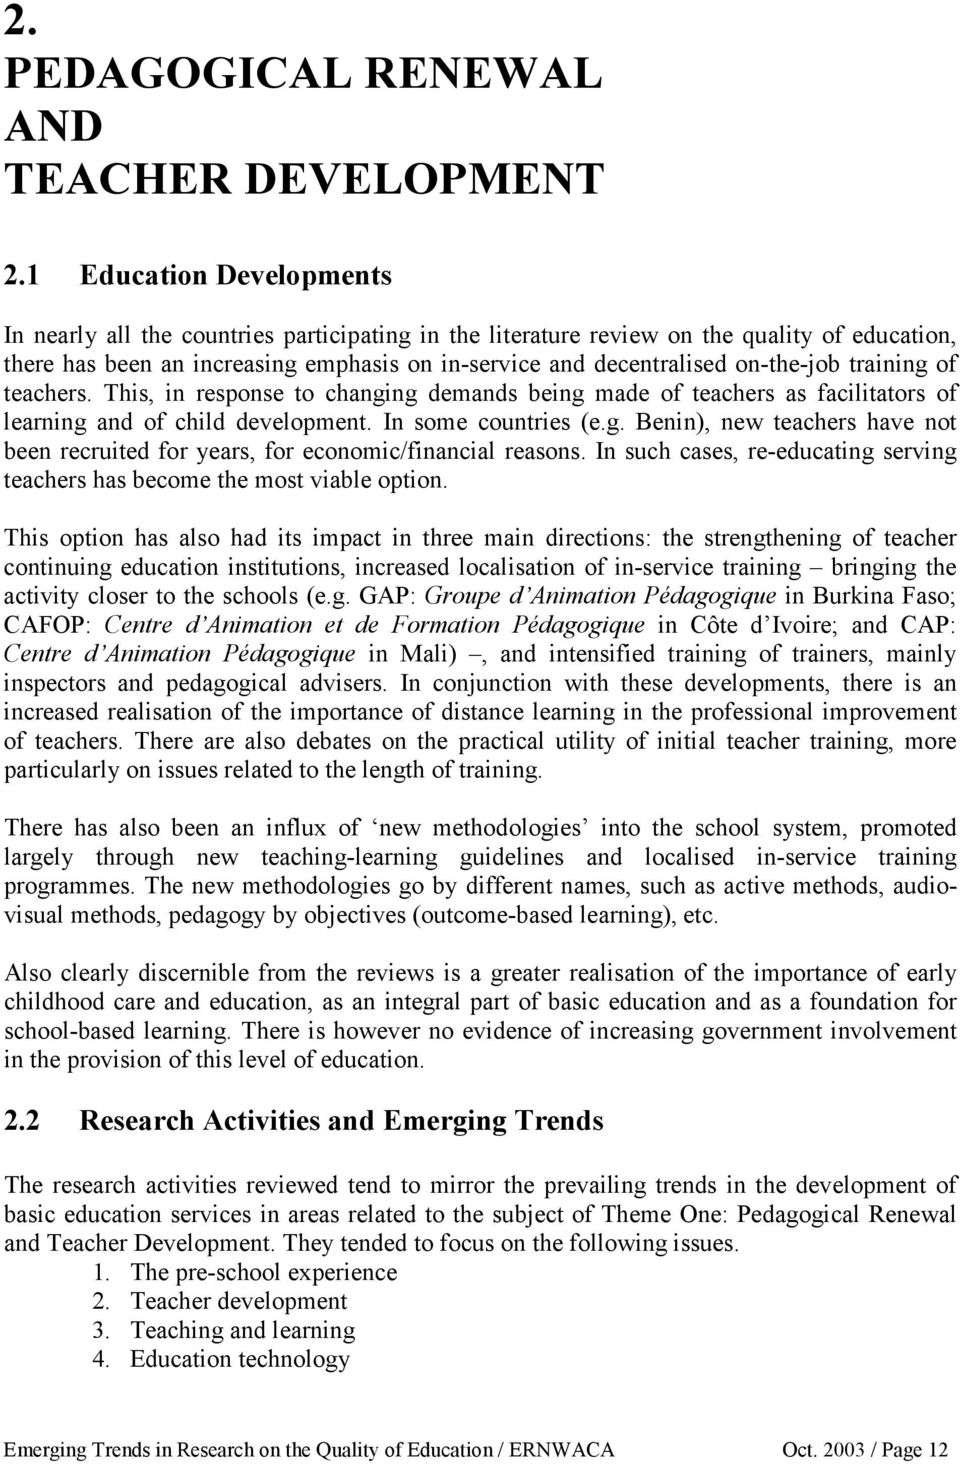 on-the-job training of teachers. This, in response to changing demands being made of teachers as facilitators of learning and of child development. In some countries (e.g. Benin), new teachers have not been recruited for years, for economic/financial reasons.